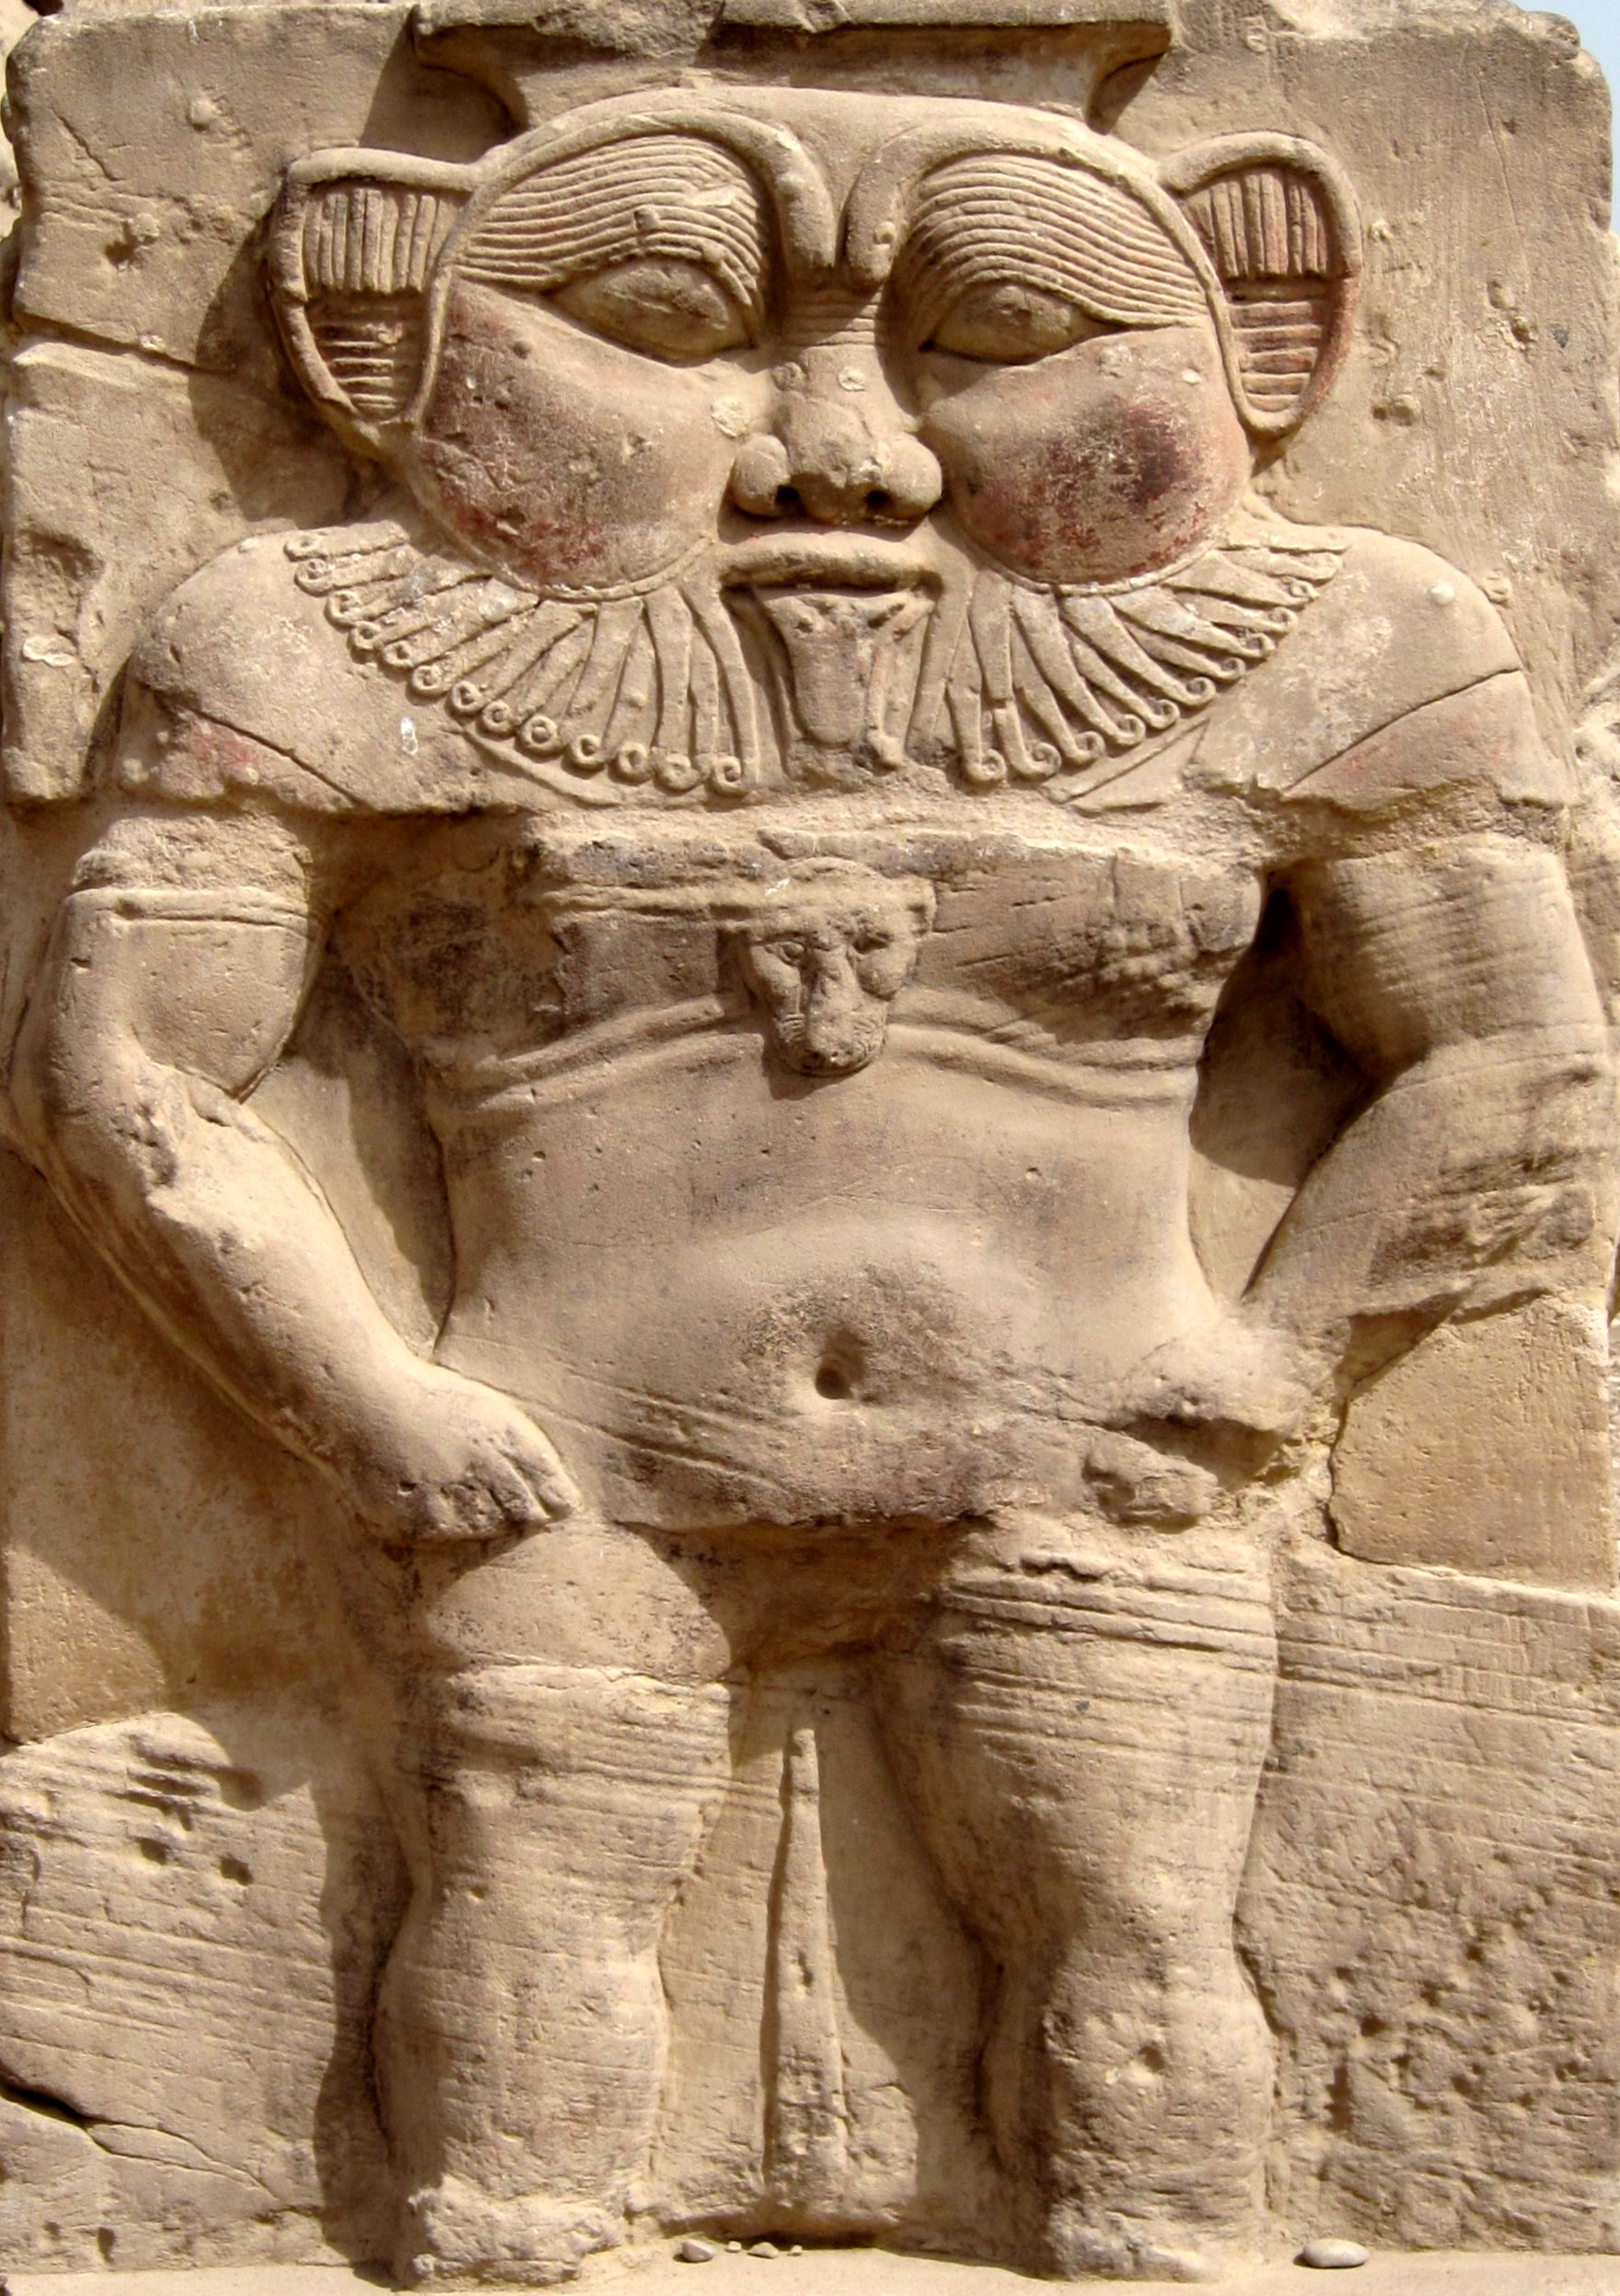 PHOTO: Relief of the god Bes next to the Roman north gate of the temple complex of Dendera, Egypt.